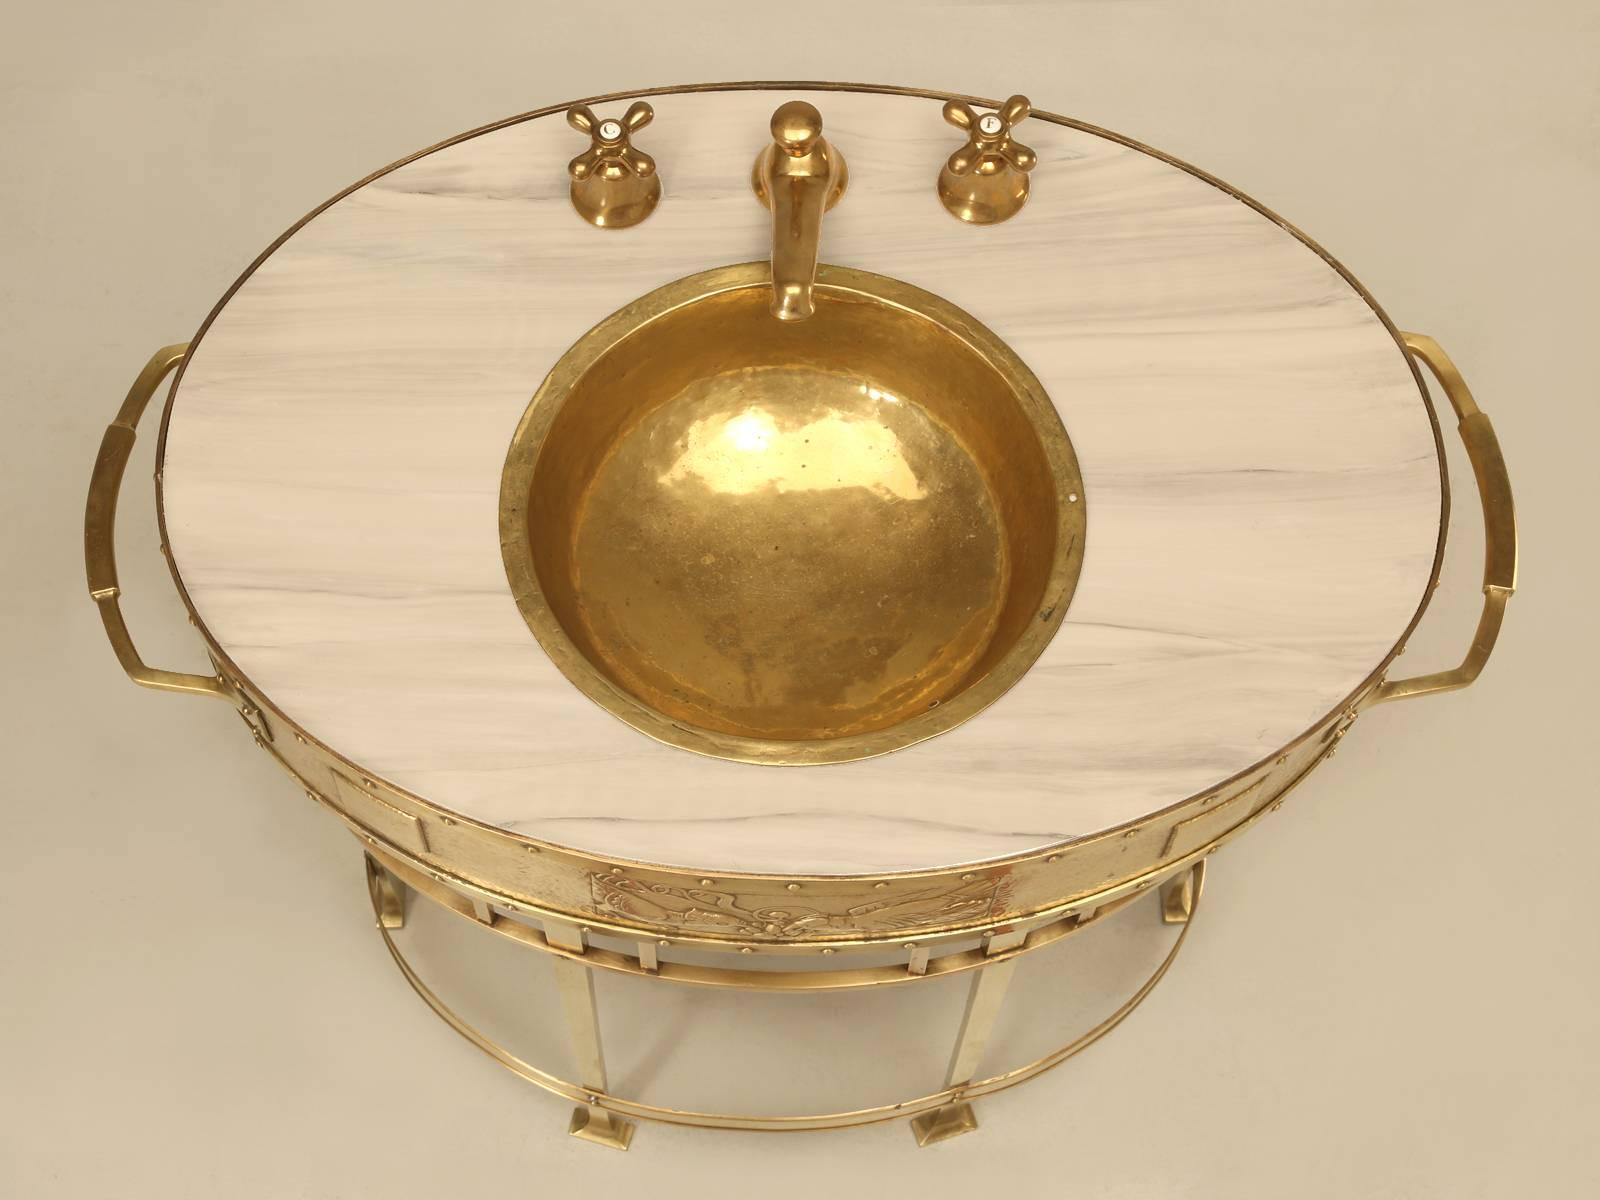 From the very moment we found this jardinière outside of Paris, we knew instantly that it would make for a great powder room vanity. Handmade, circa 1900, from brass and bronze to hold plants and the image of the proposed conversion you see here,